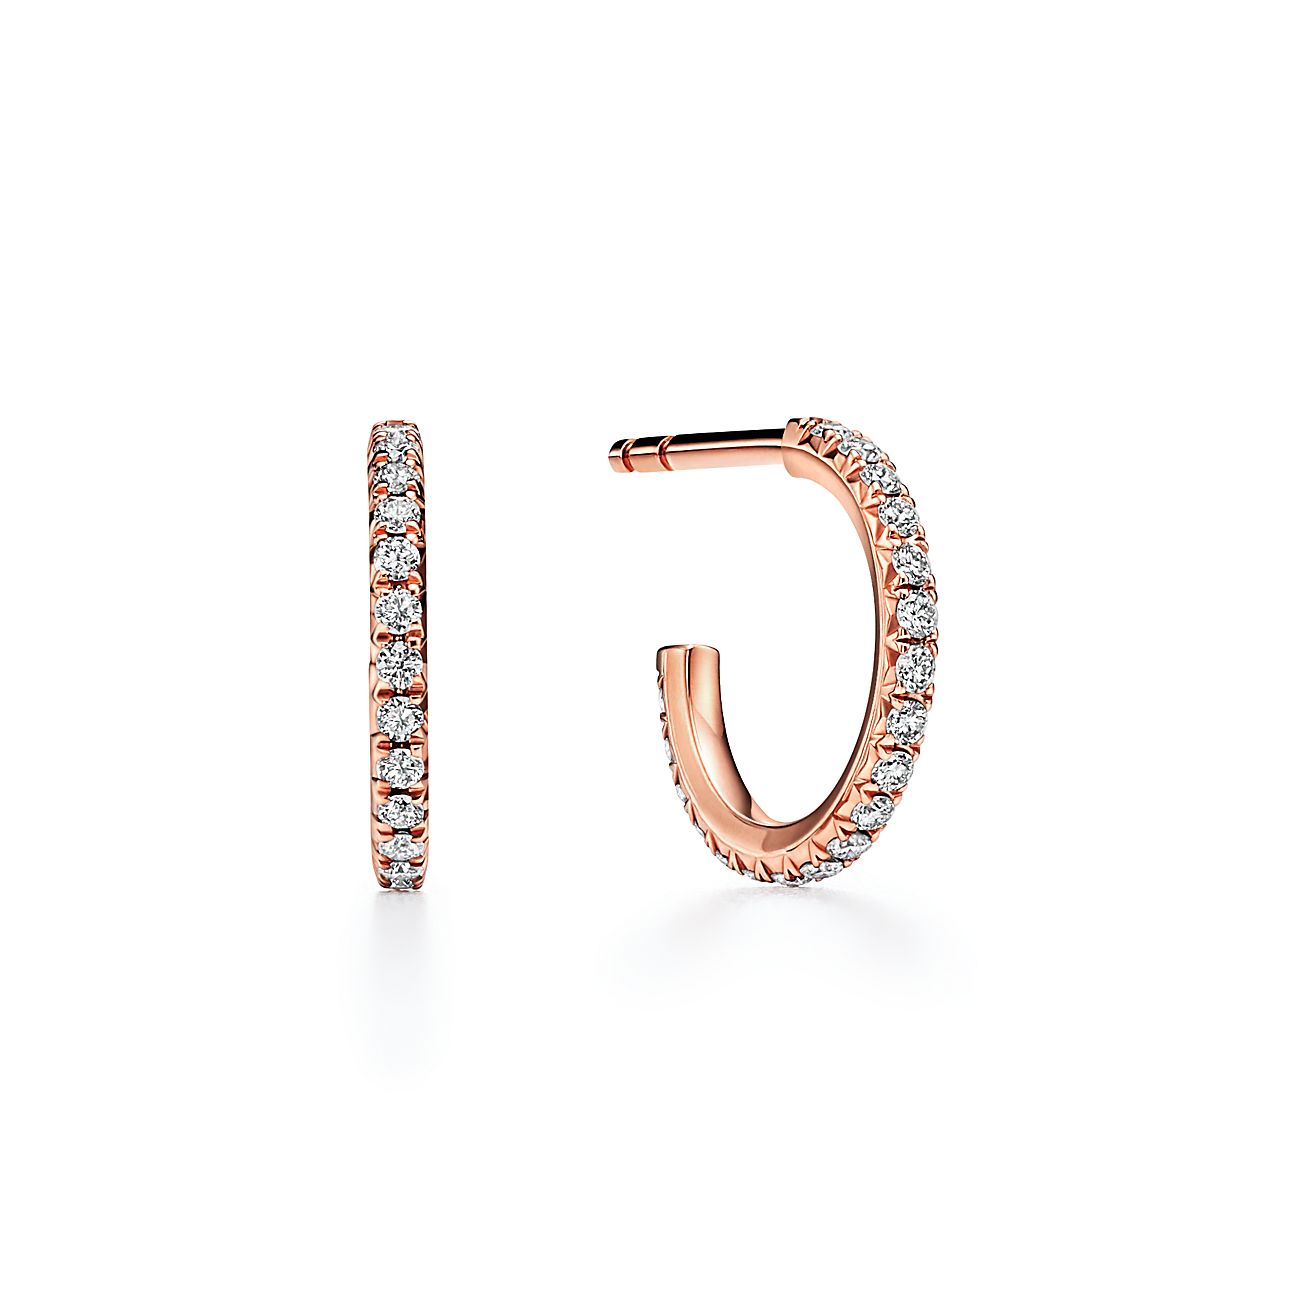 Tiffany Metro Hoop Earrings in Rose Gold with Diamonds, Small | Tiffany ...